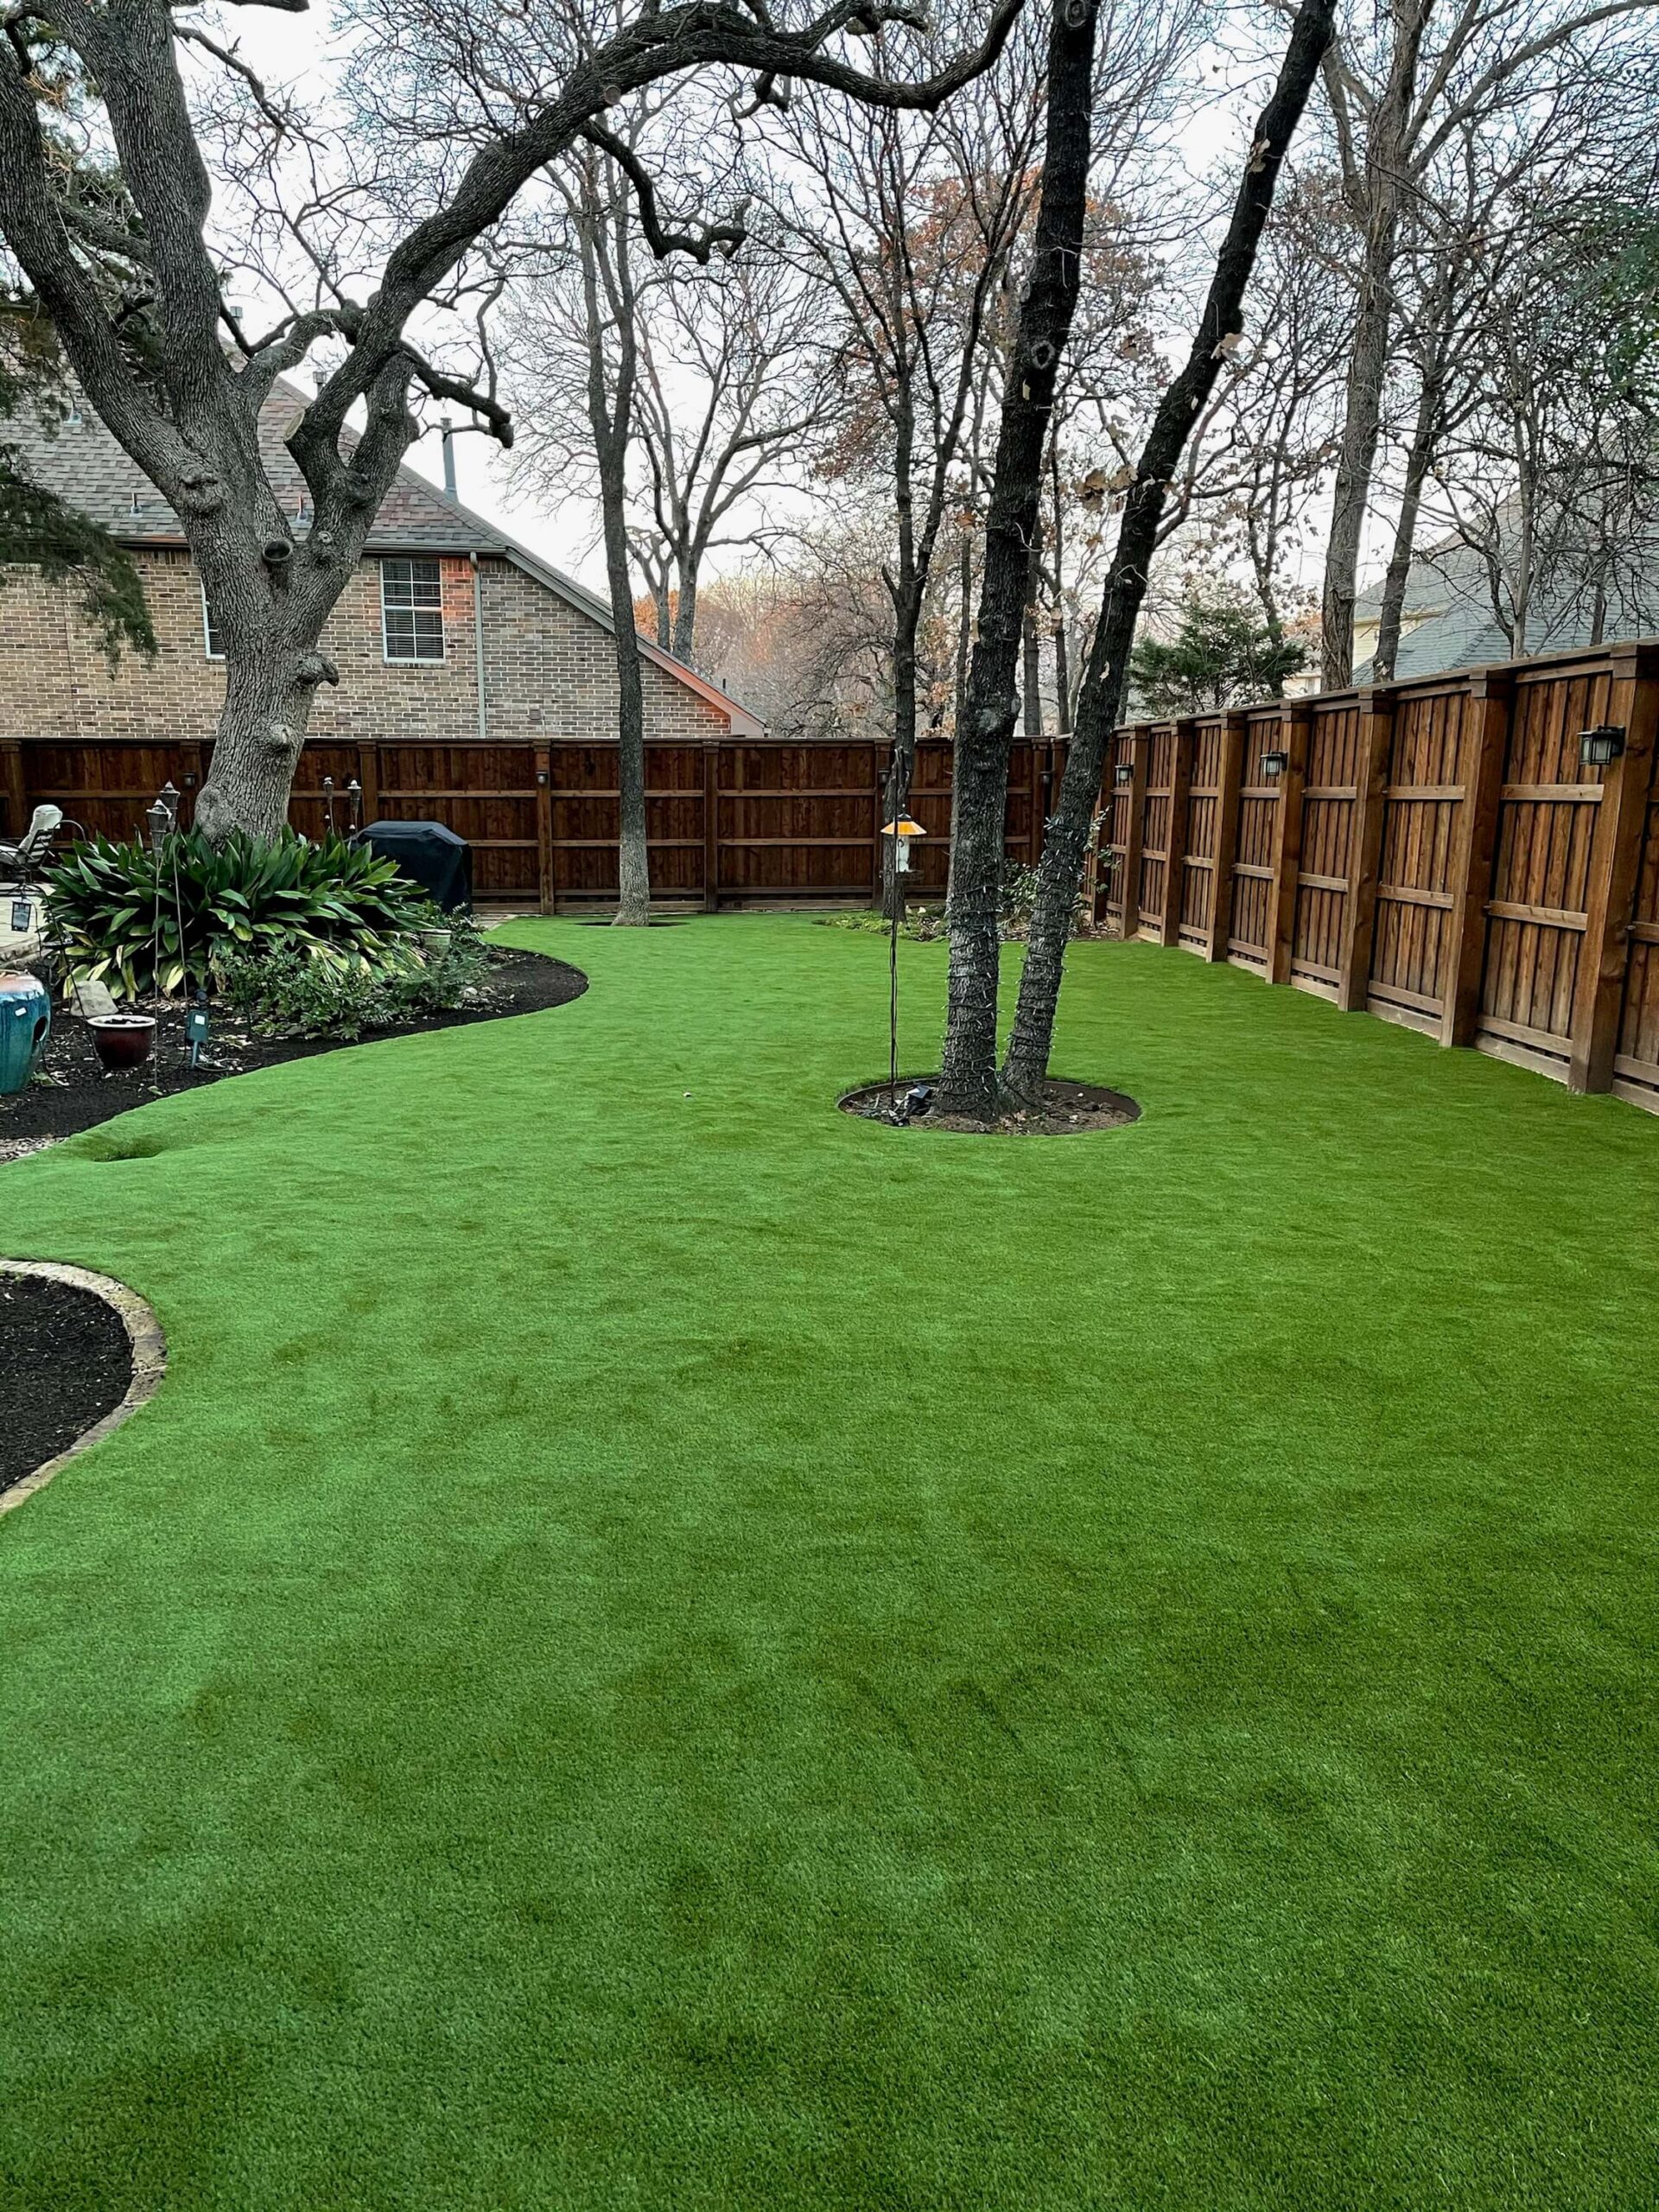 How To Install Artificial Grass | tunersread.com